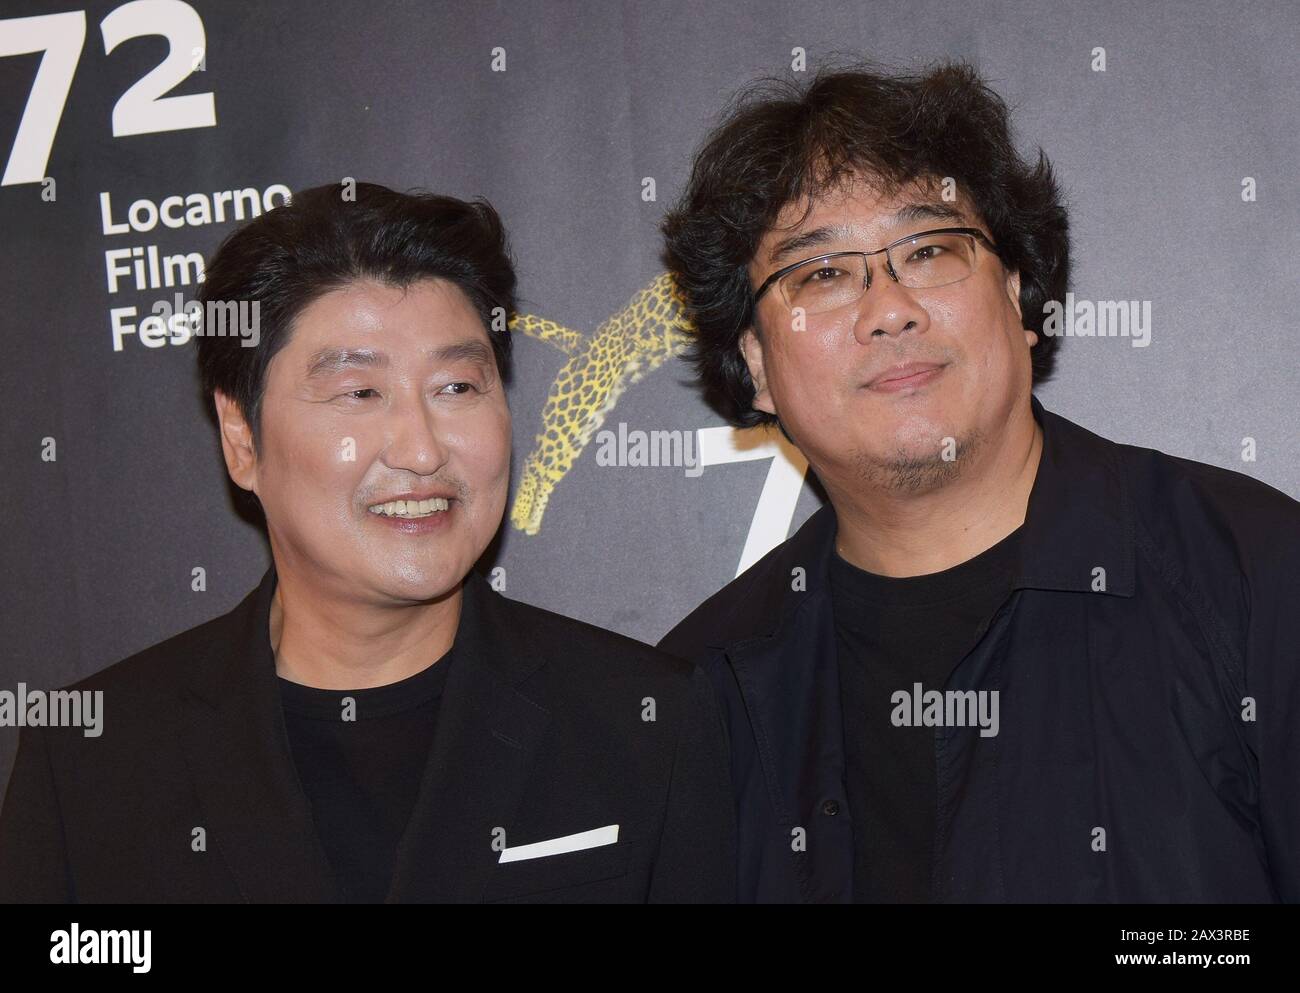 Milan, Italy. 10th Feb, 2020. Locarno, Switzerland Locarno Film Festival  2019 Switzerland, Red carpet For the film Parasite by director BONG  Joon-ho, SONG Kang-ho actor receives the Excellence Award. Pictured:  director BONG